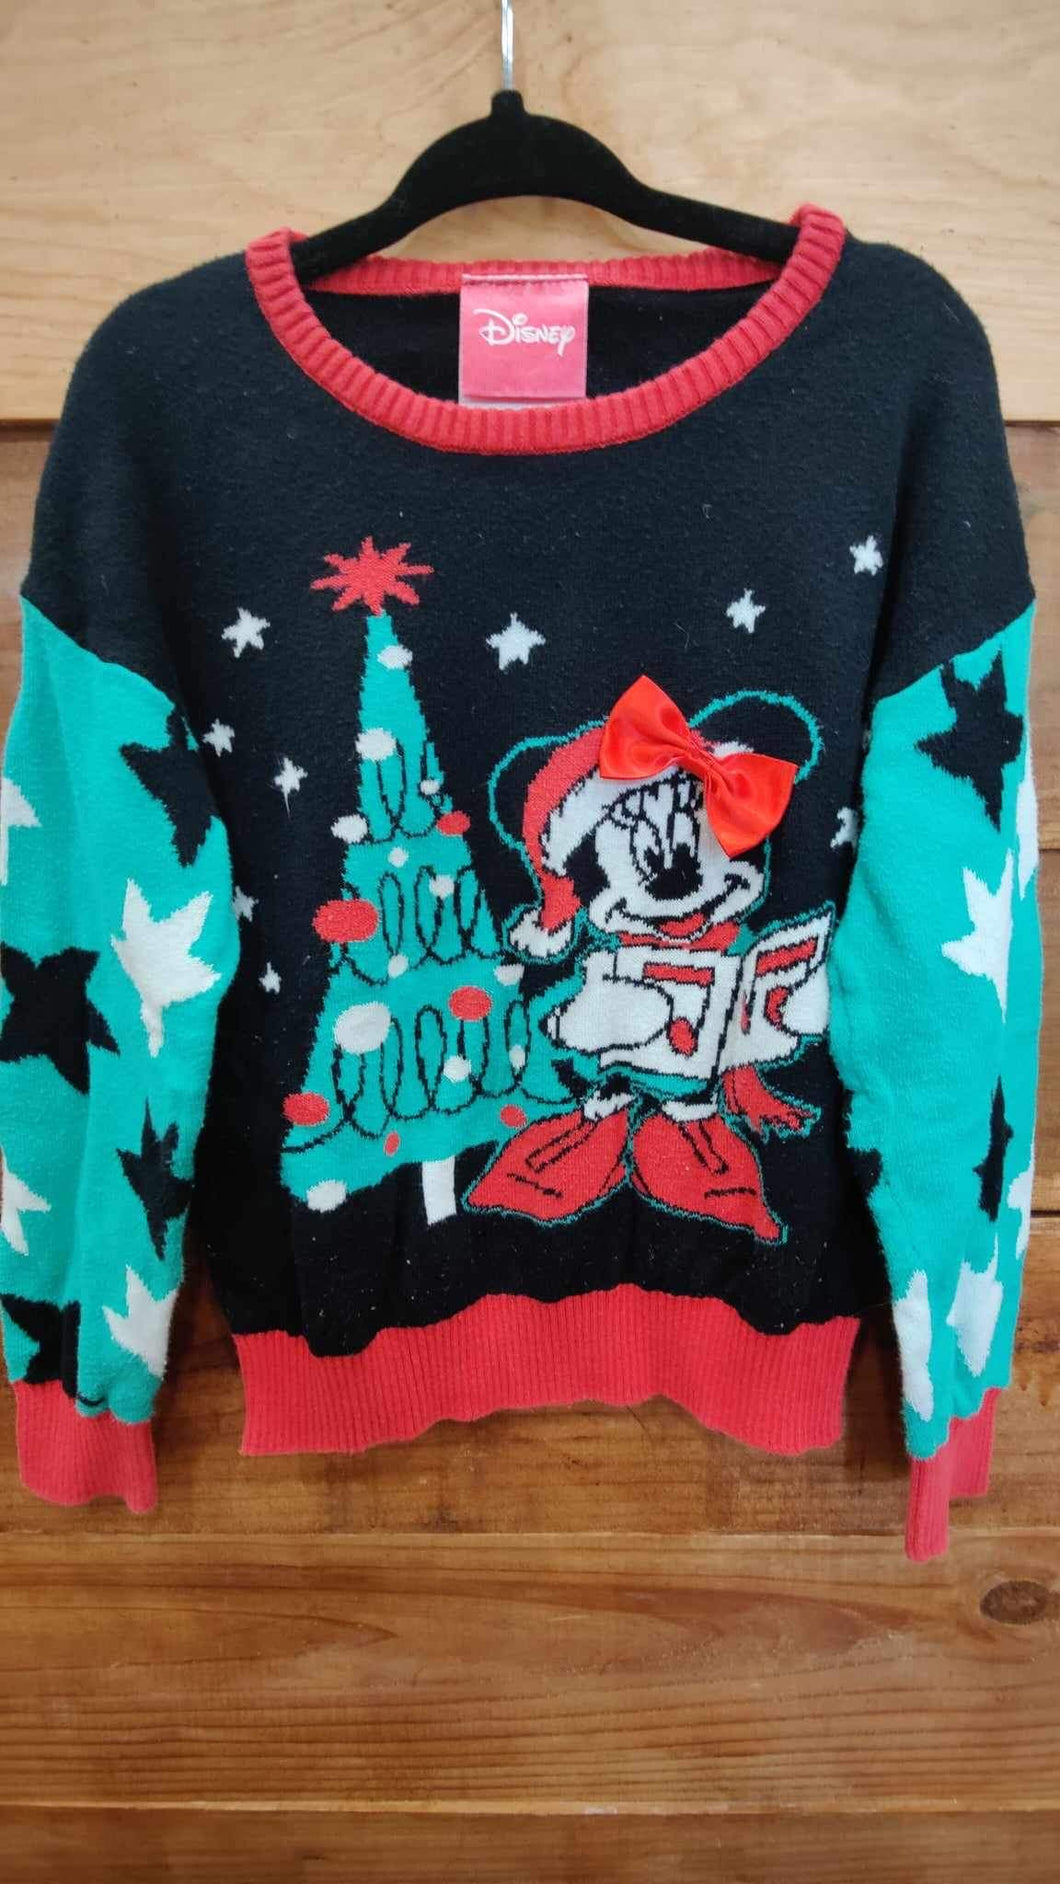 Disney Minnie Mouse Christmas Sweater Size 4T